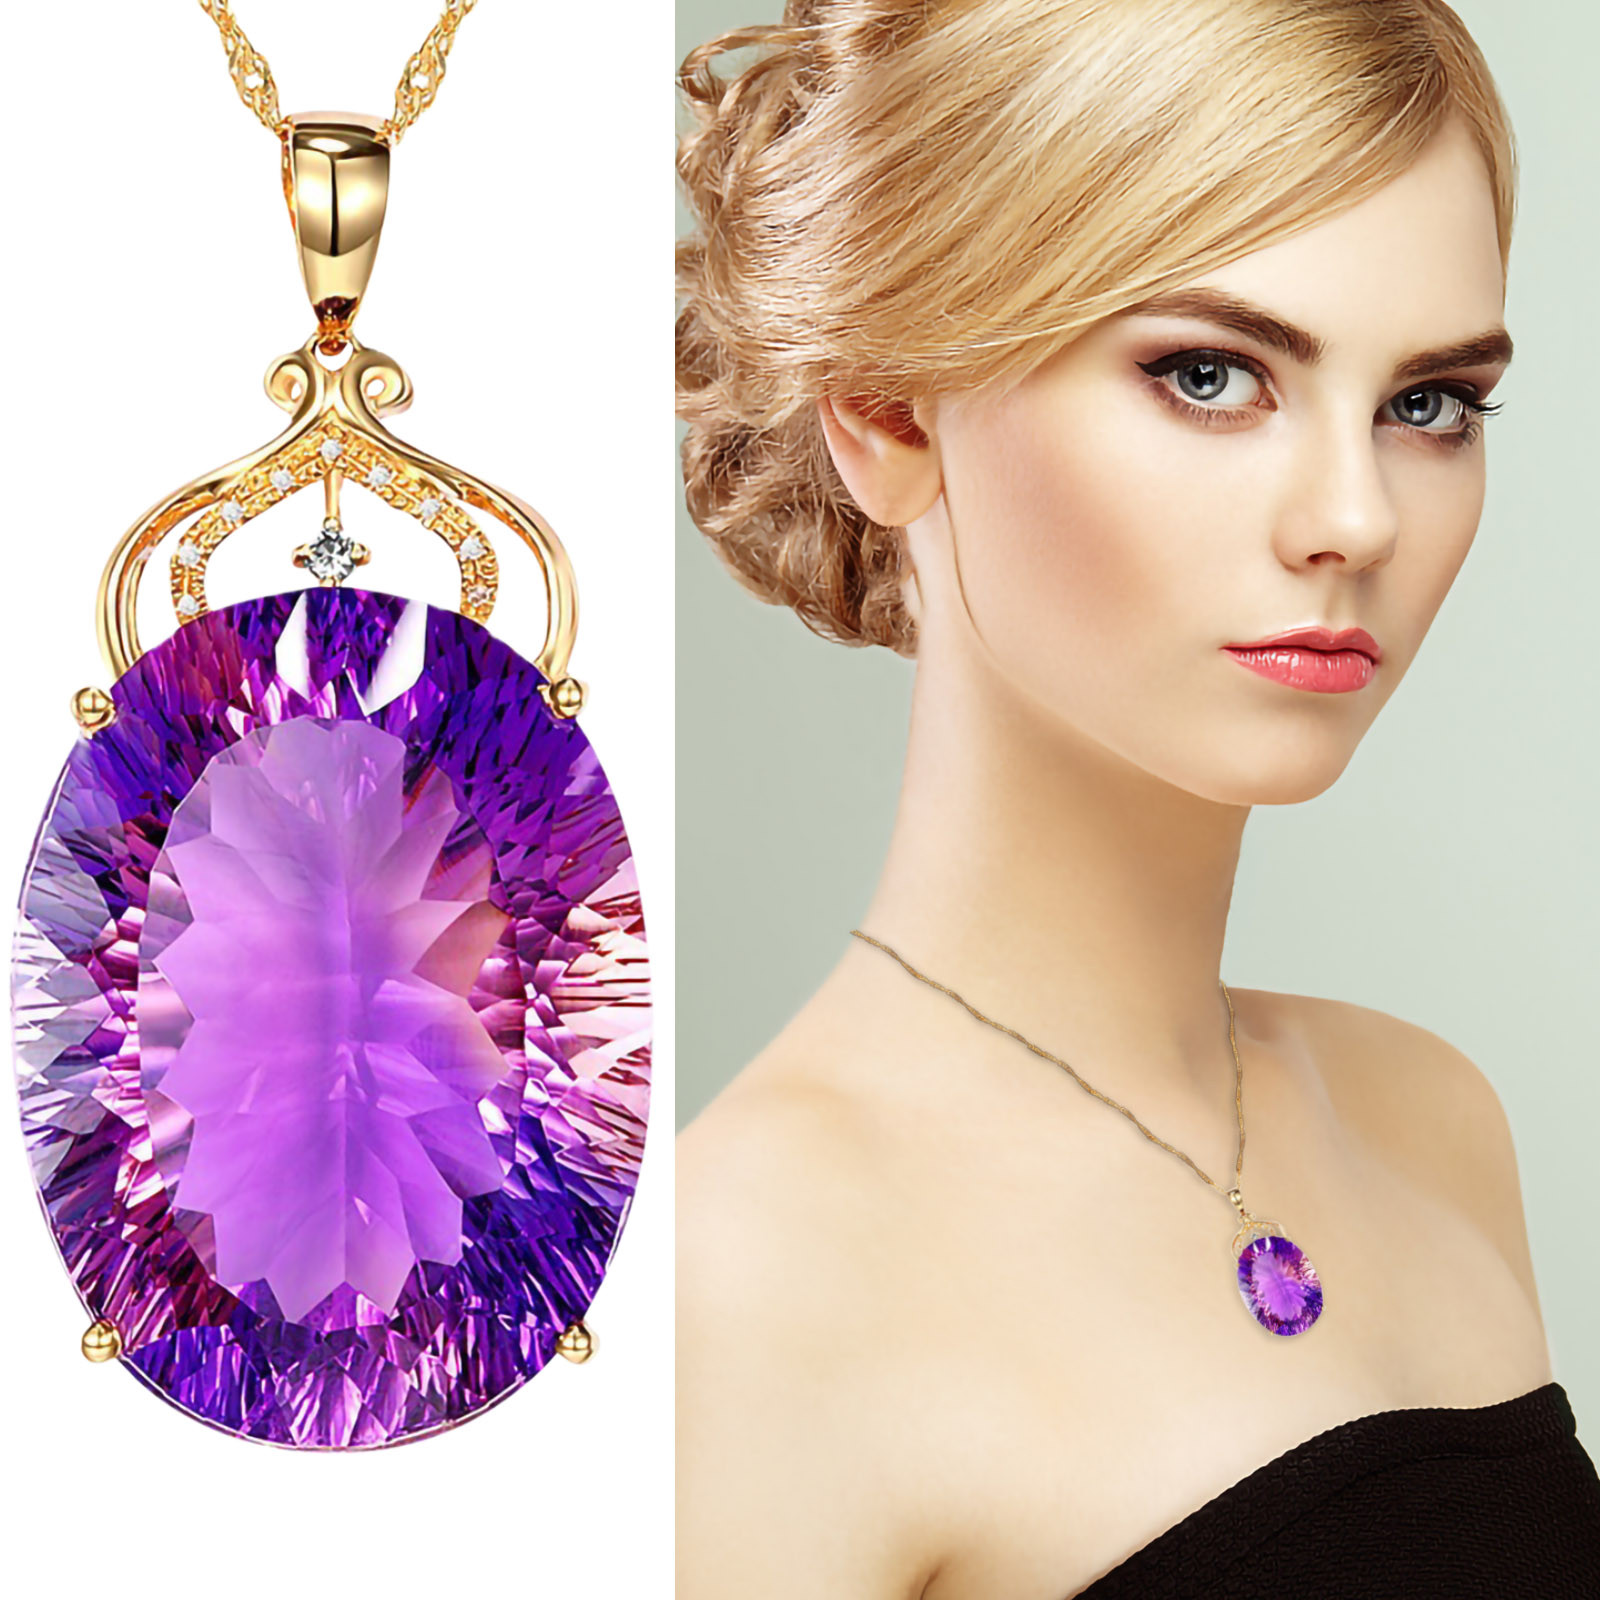 Apmemiss Wholesale European And American Ladies Fashion Luxury Amethyst Pendant Necklace Amethyst Gemstone Necklace Jewelry - image 2 of 8